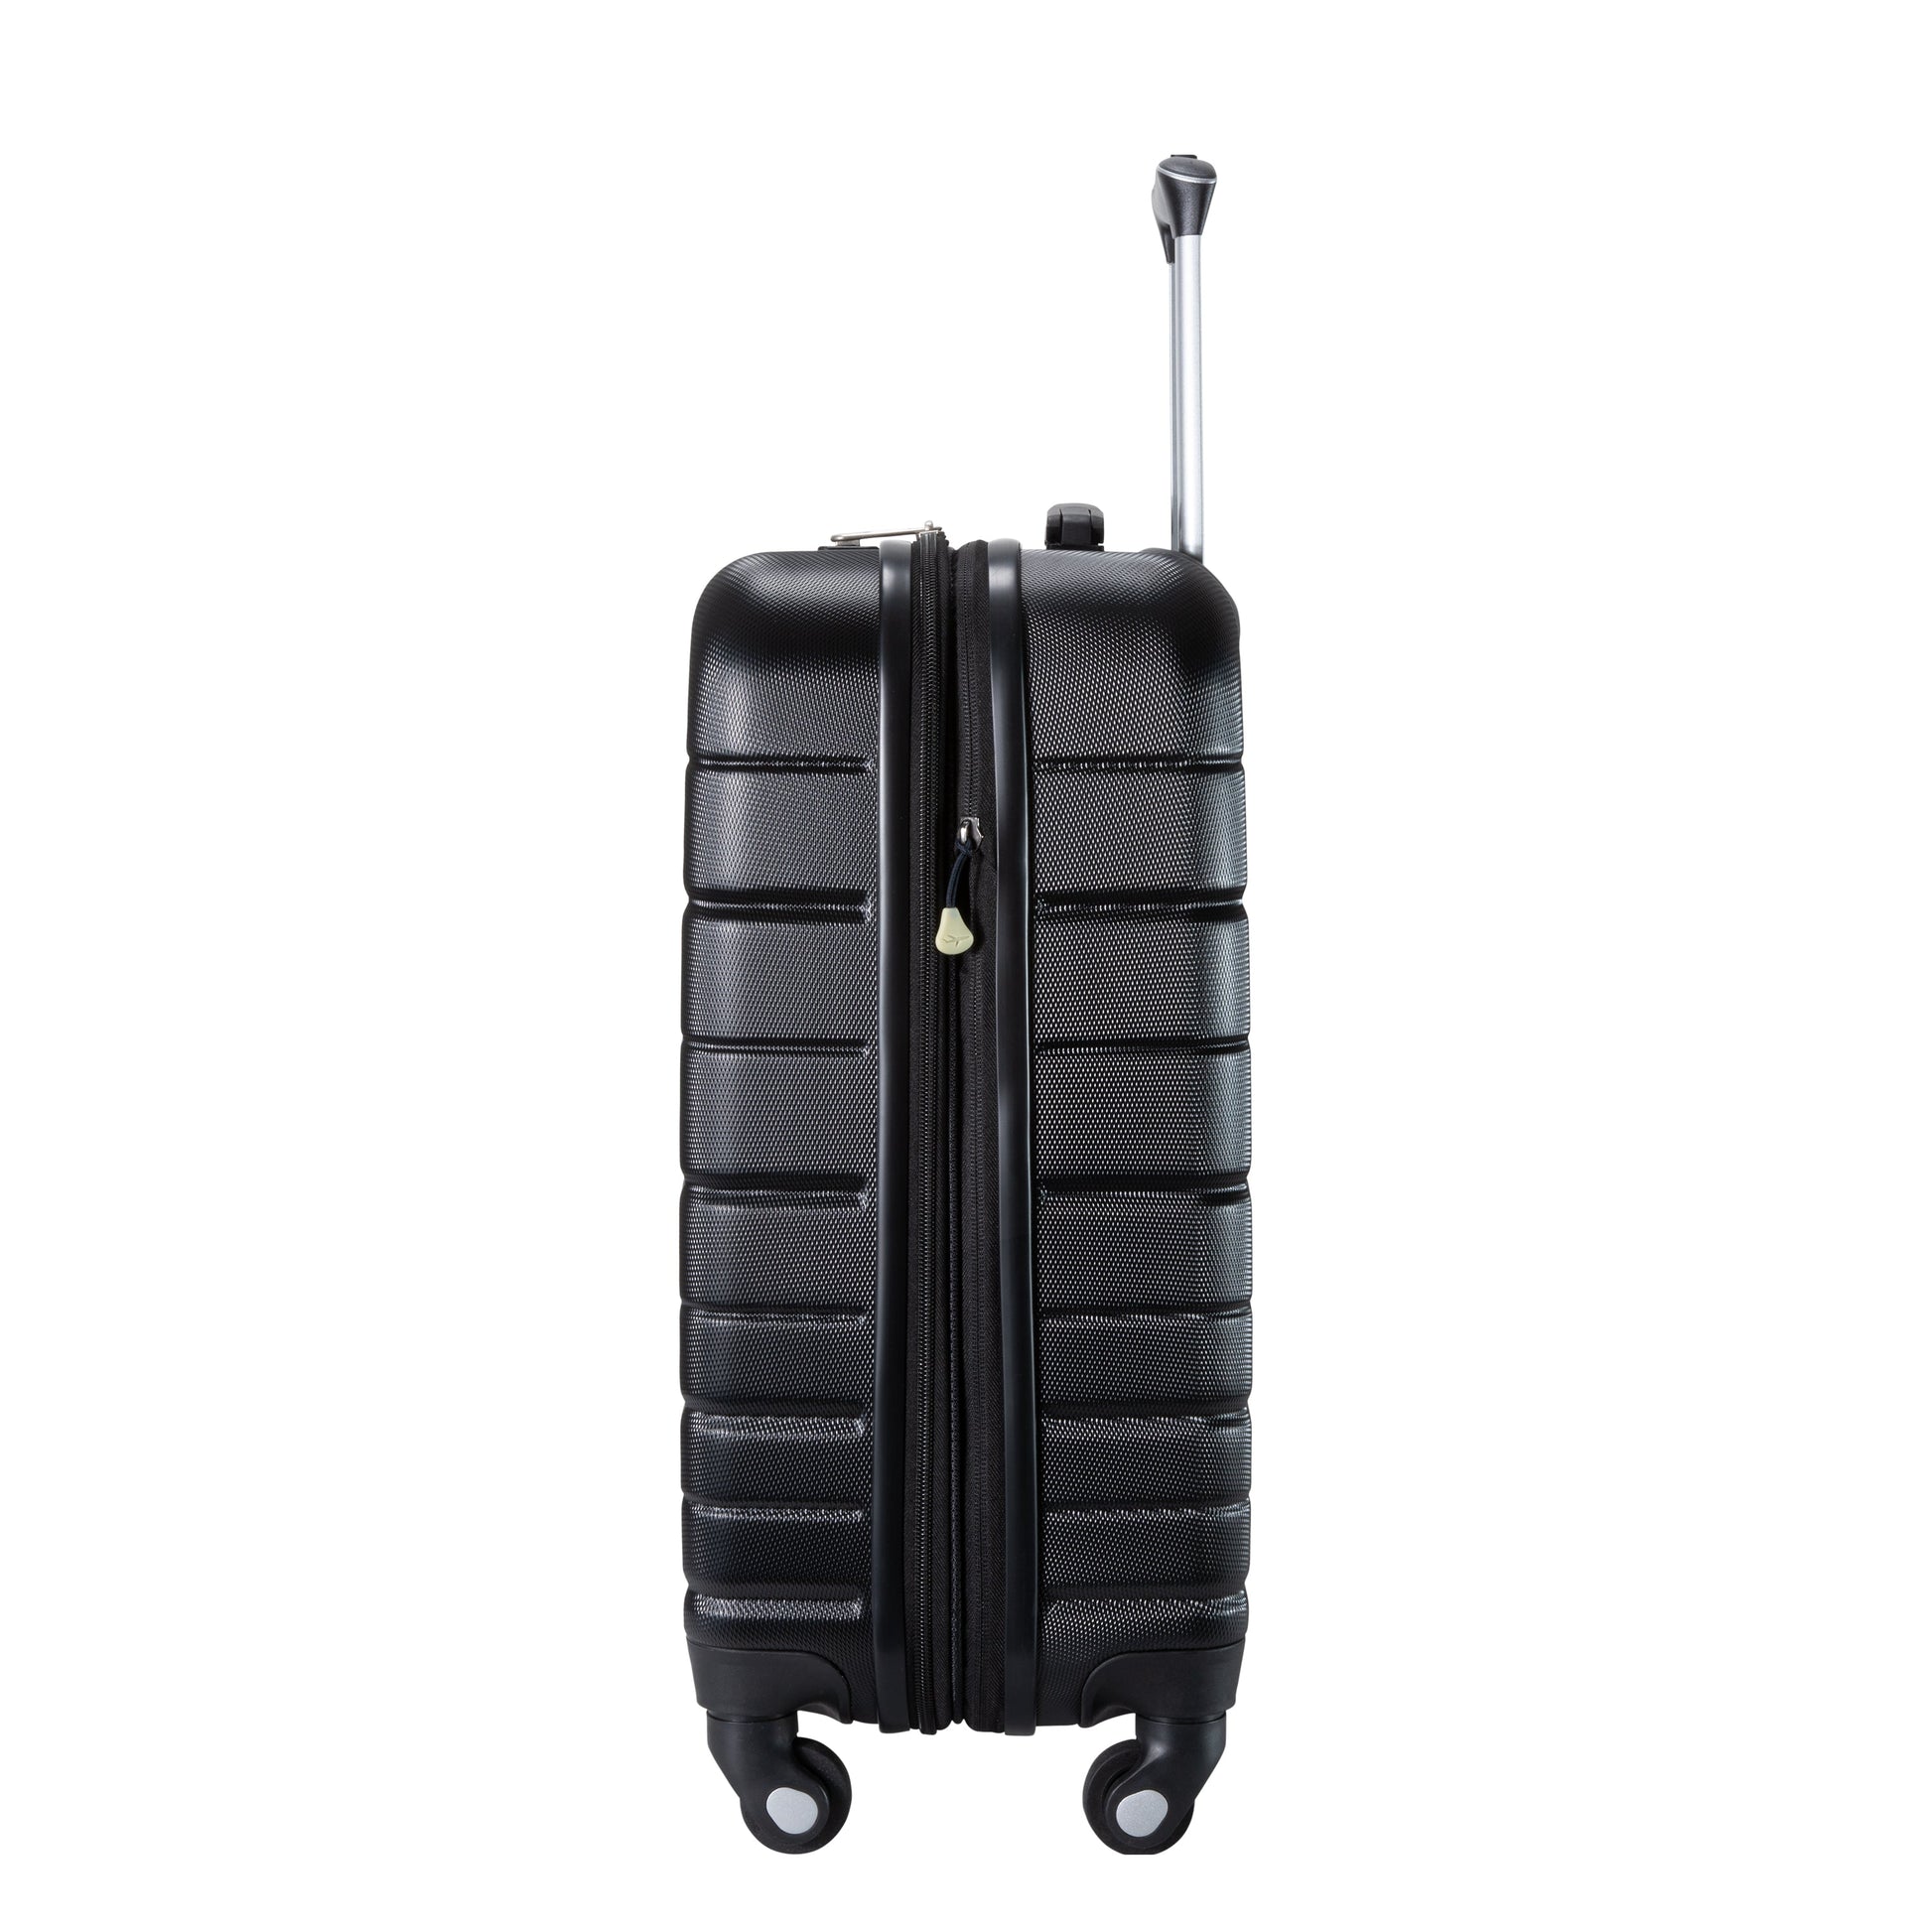 Skyway Epic 2.0 Carry-On Luggage